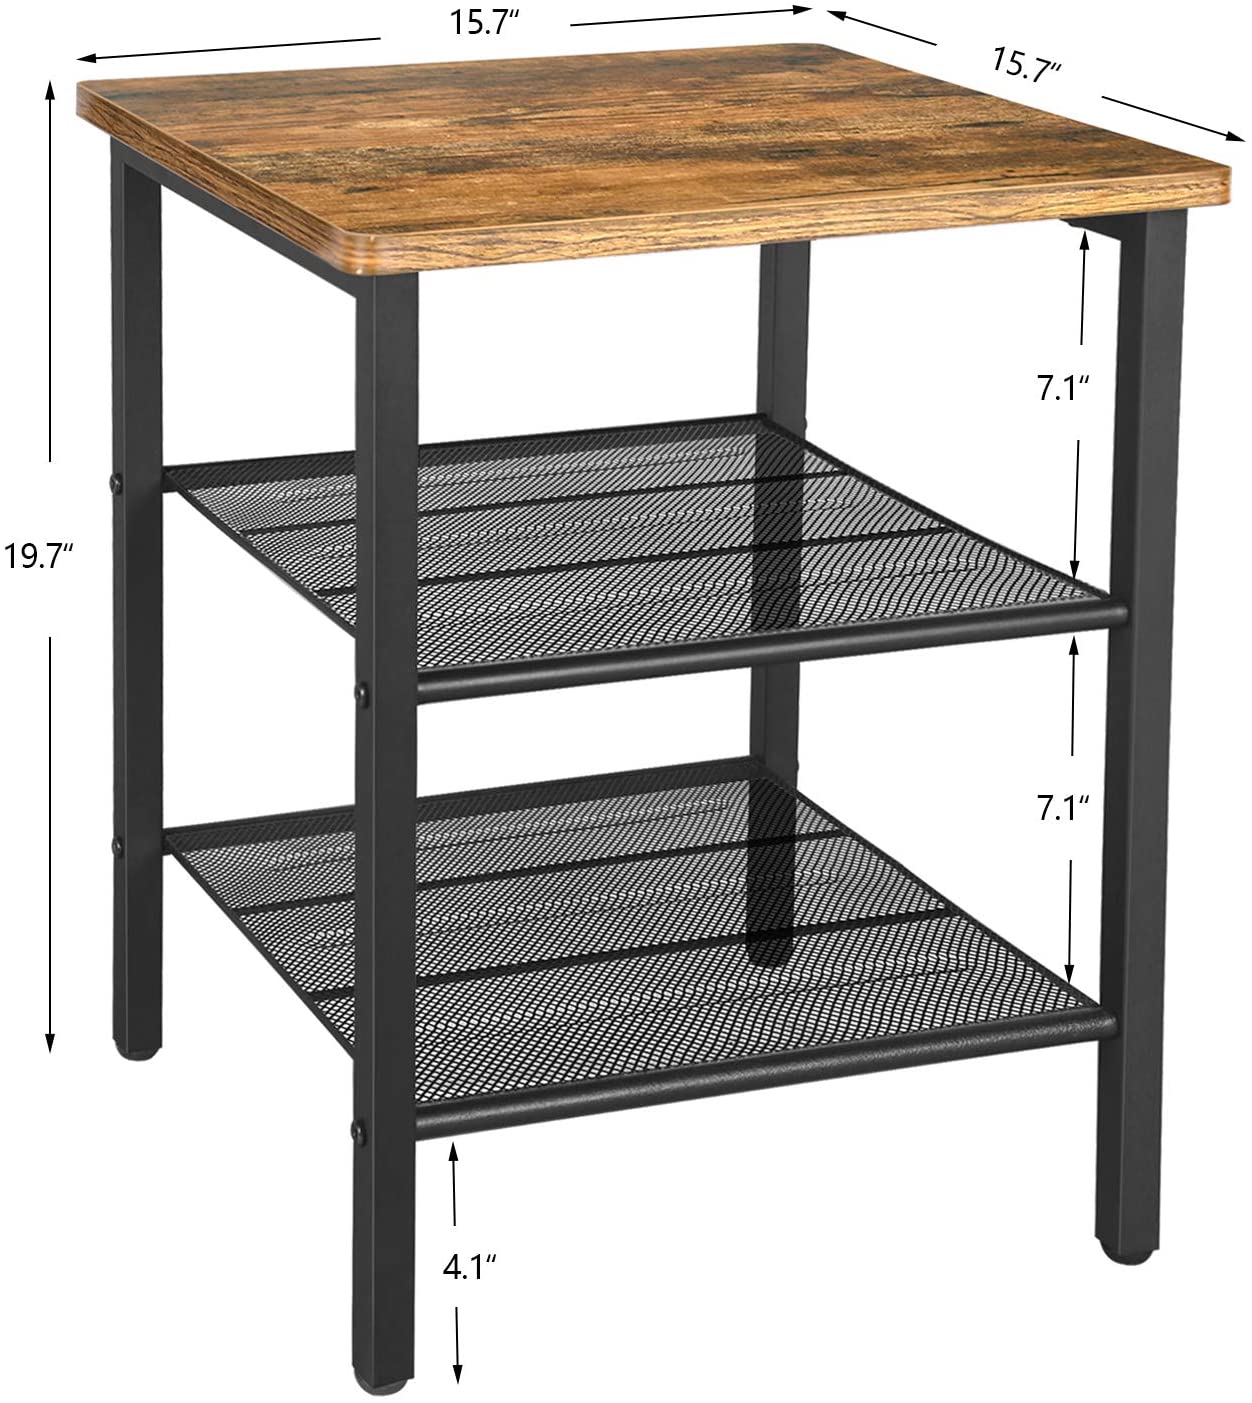 Wood-Steel Nightstand Table with Storage Shelves